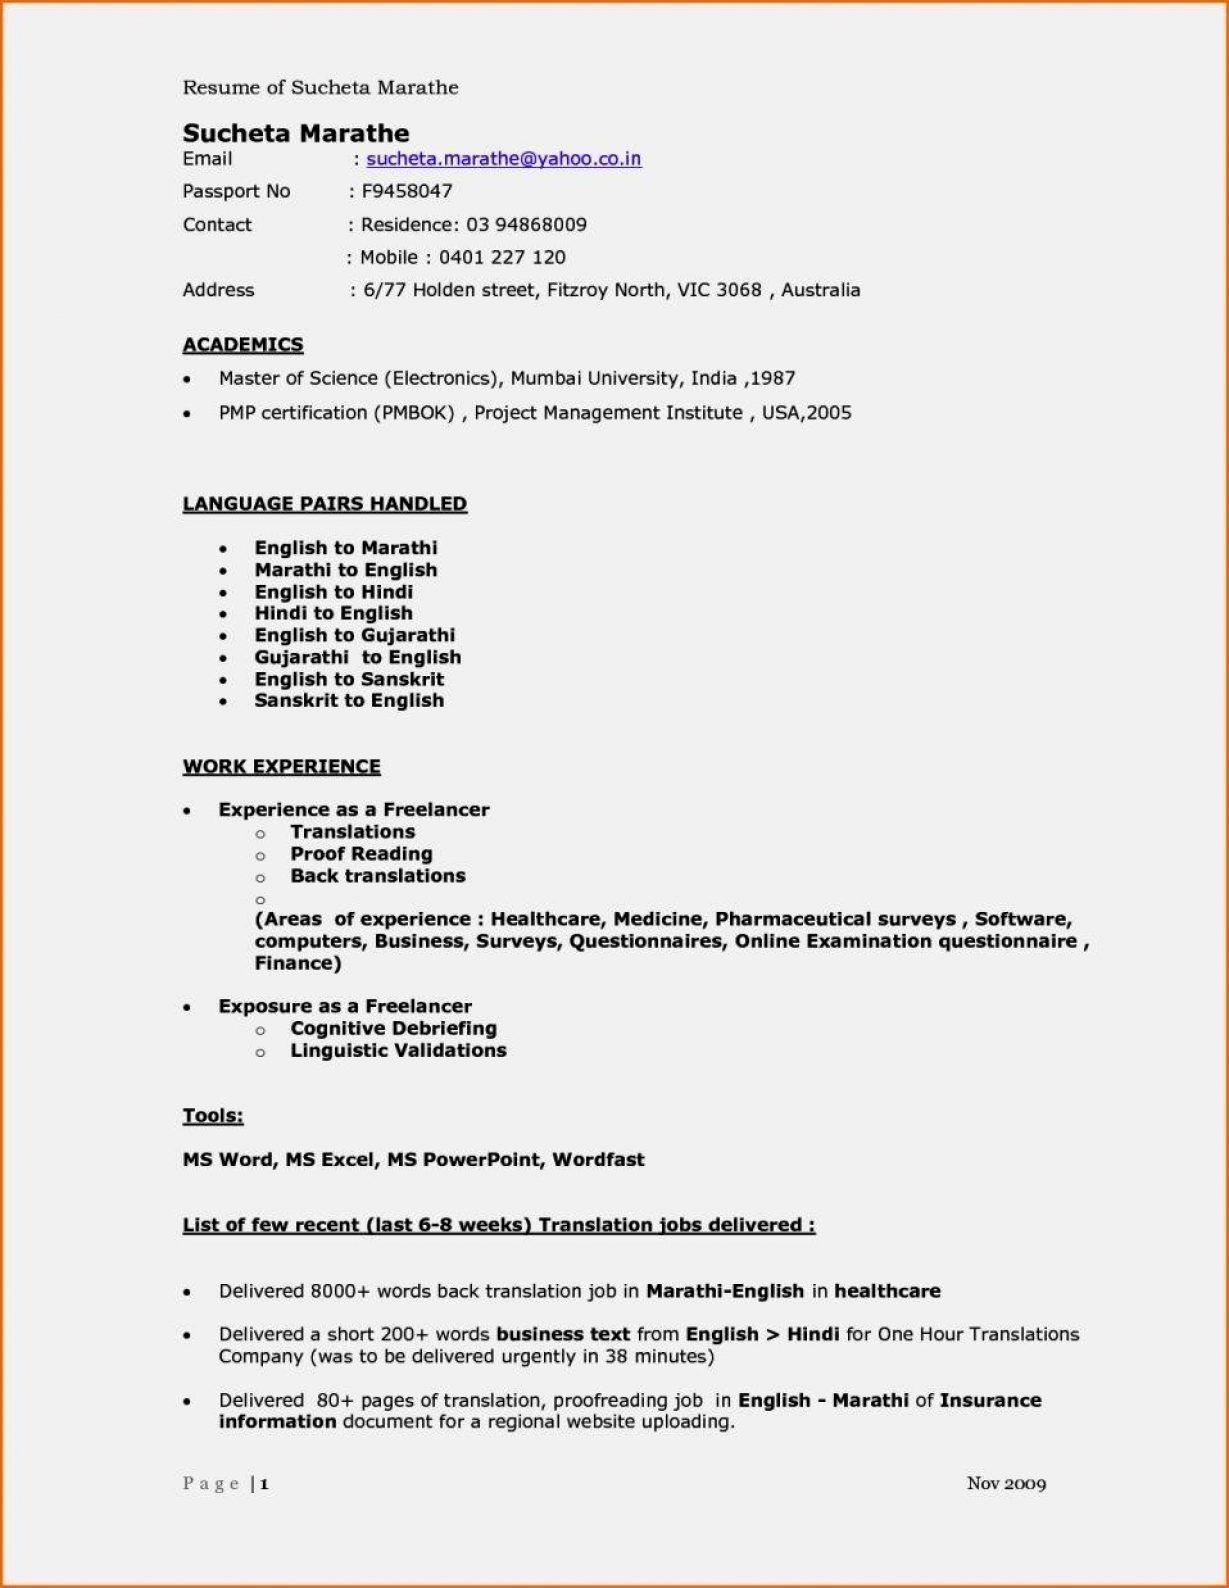 A Cv Template For A 16 Year Old , CvTemplate template Computer